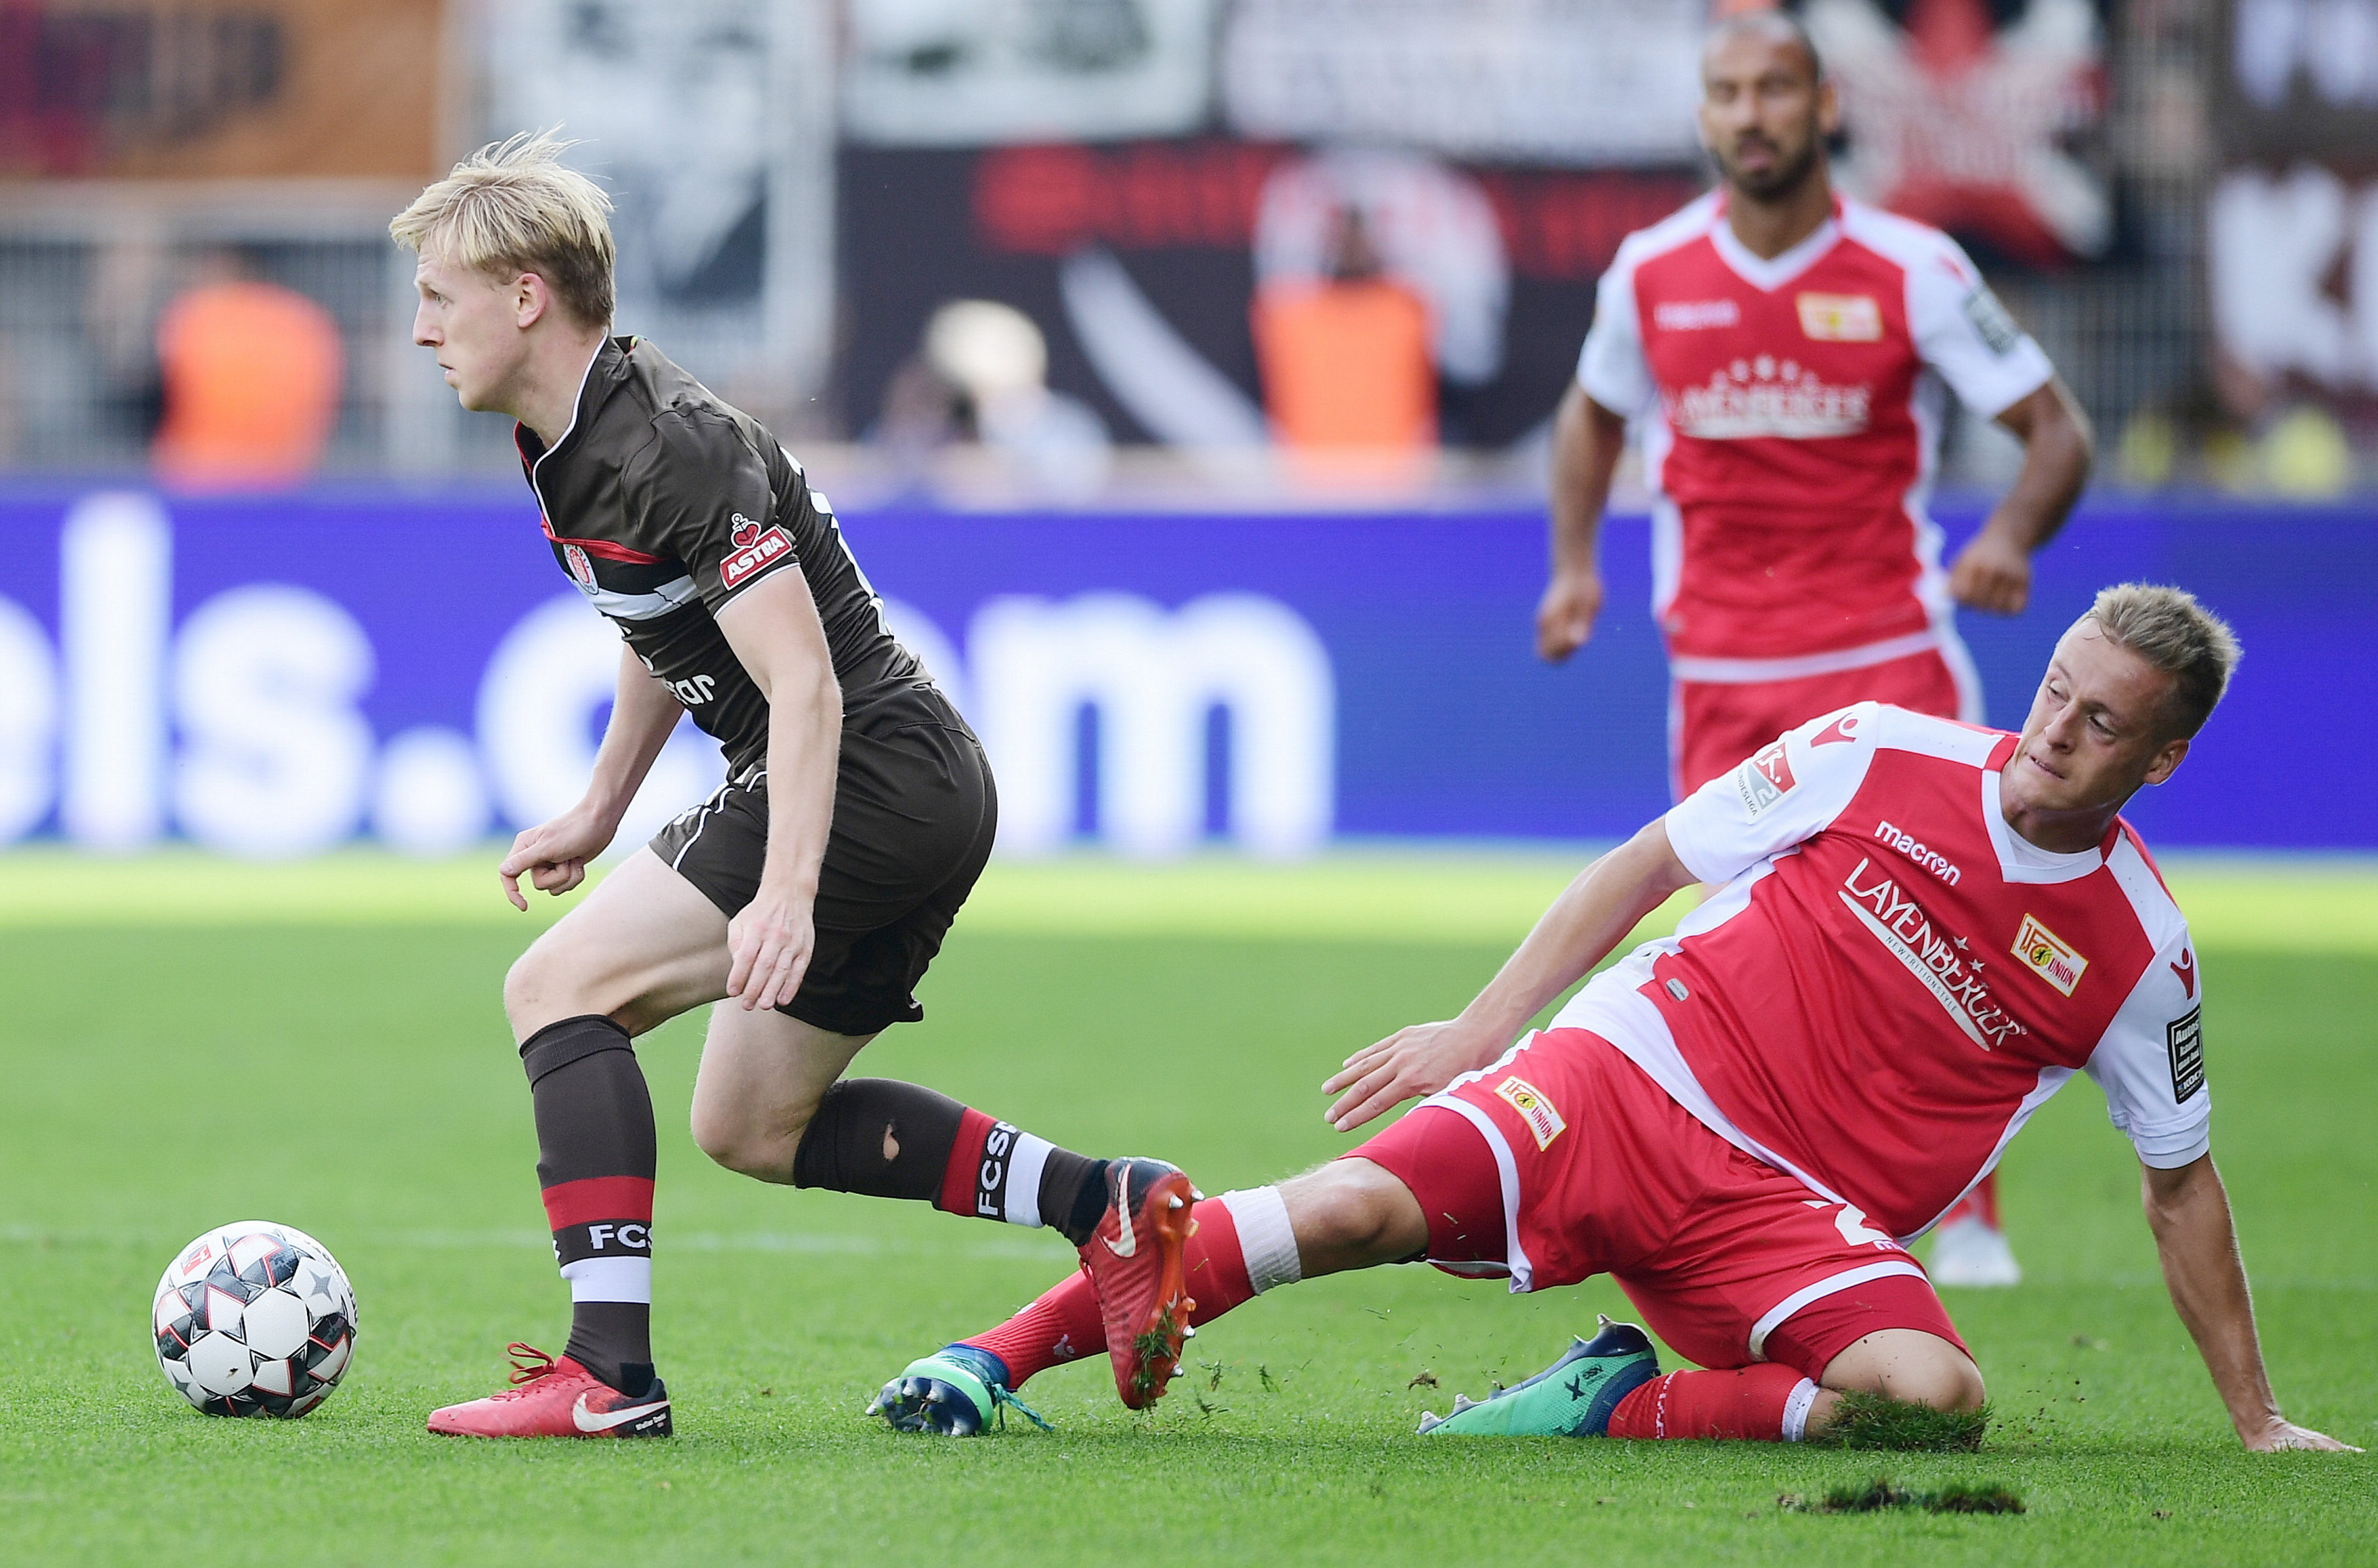 The Boys in Brown controlled the proceedings early on. Here, Mats Møller Dæhli evades a challenge from Union's Felix Kroos.